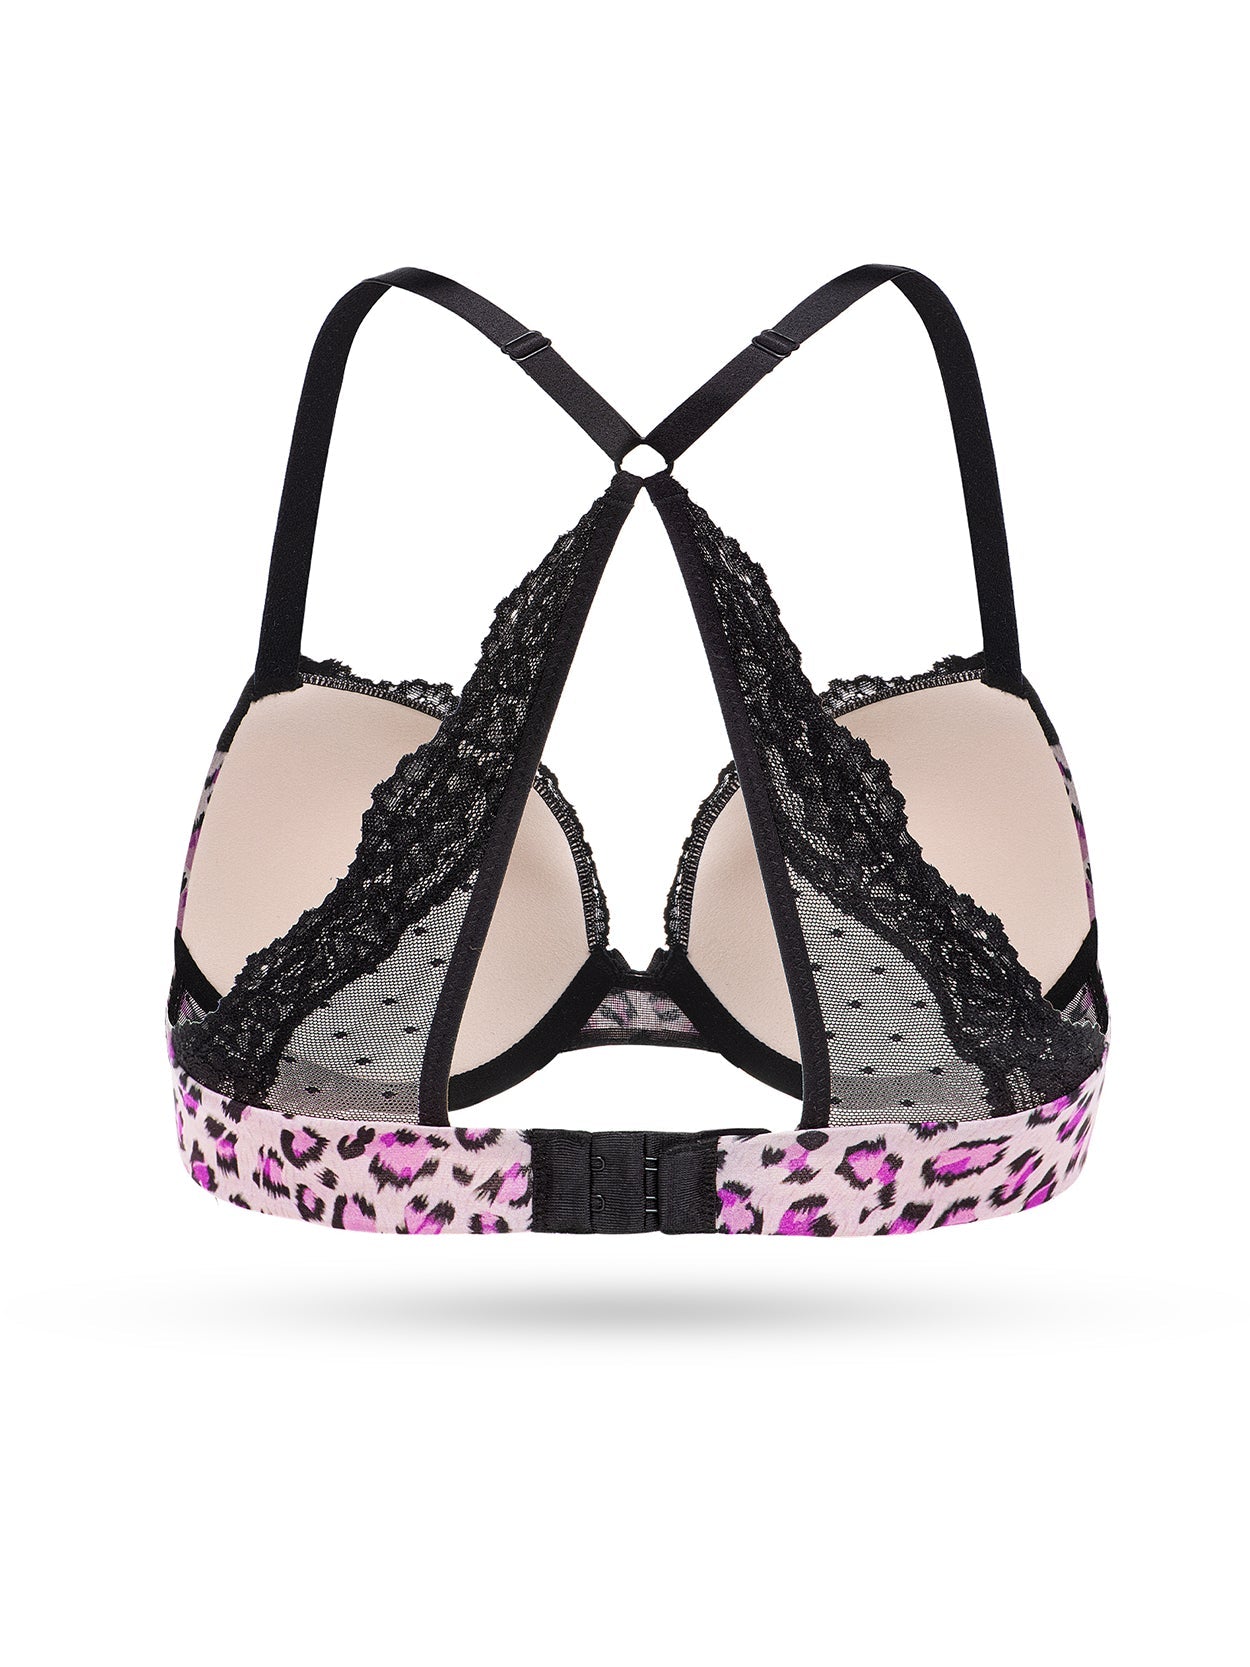 Leopard Front Closure Bra Wireless Beauty Lace Back Bras For Women Plunge  Push Up Underwear A B Cup Size Bralette 36 38 40 44CDE From Firststop998,  $18.9